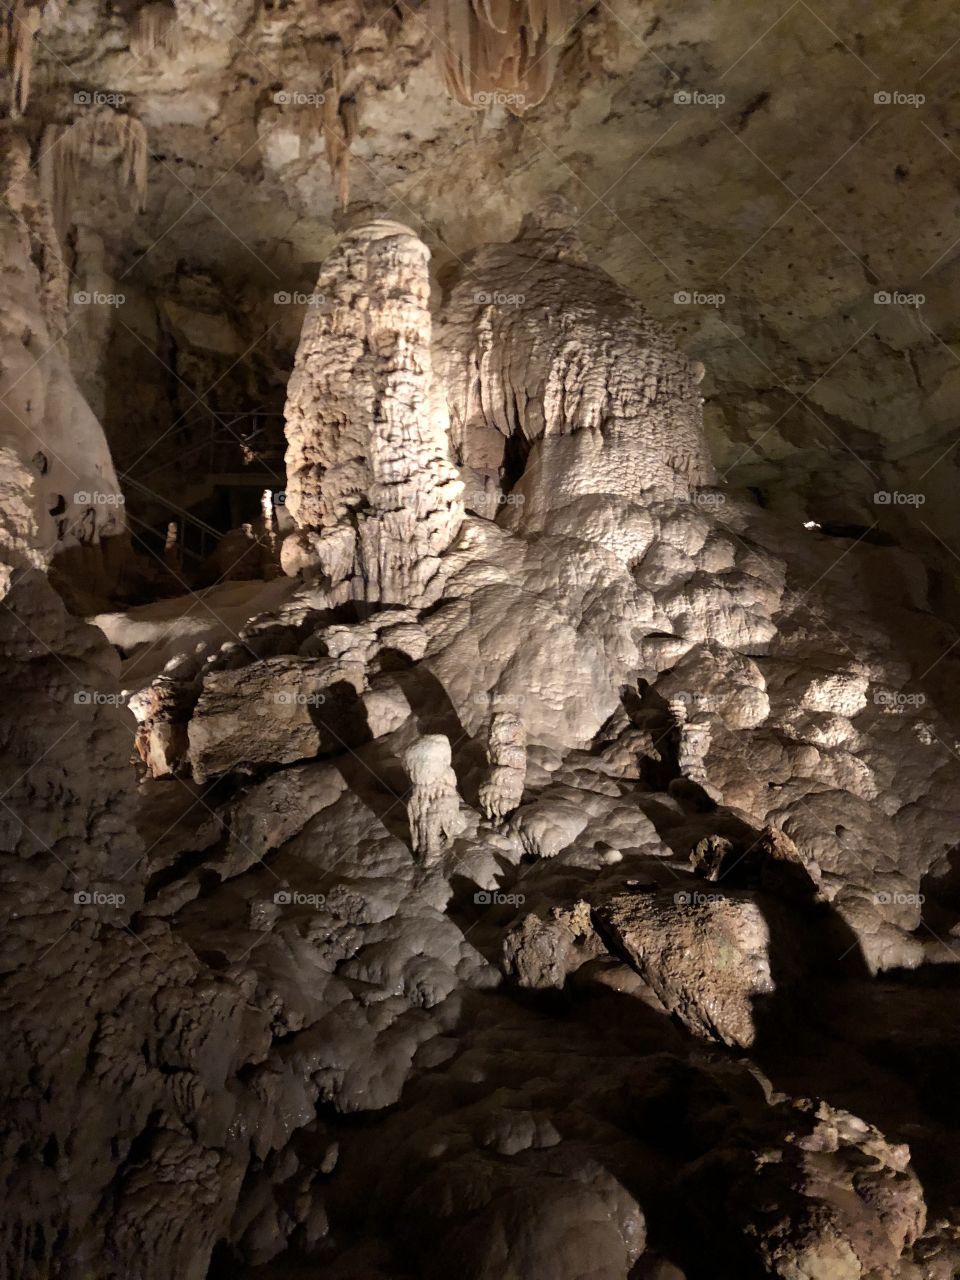 Inside the cavern, below the earth 